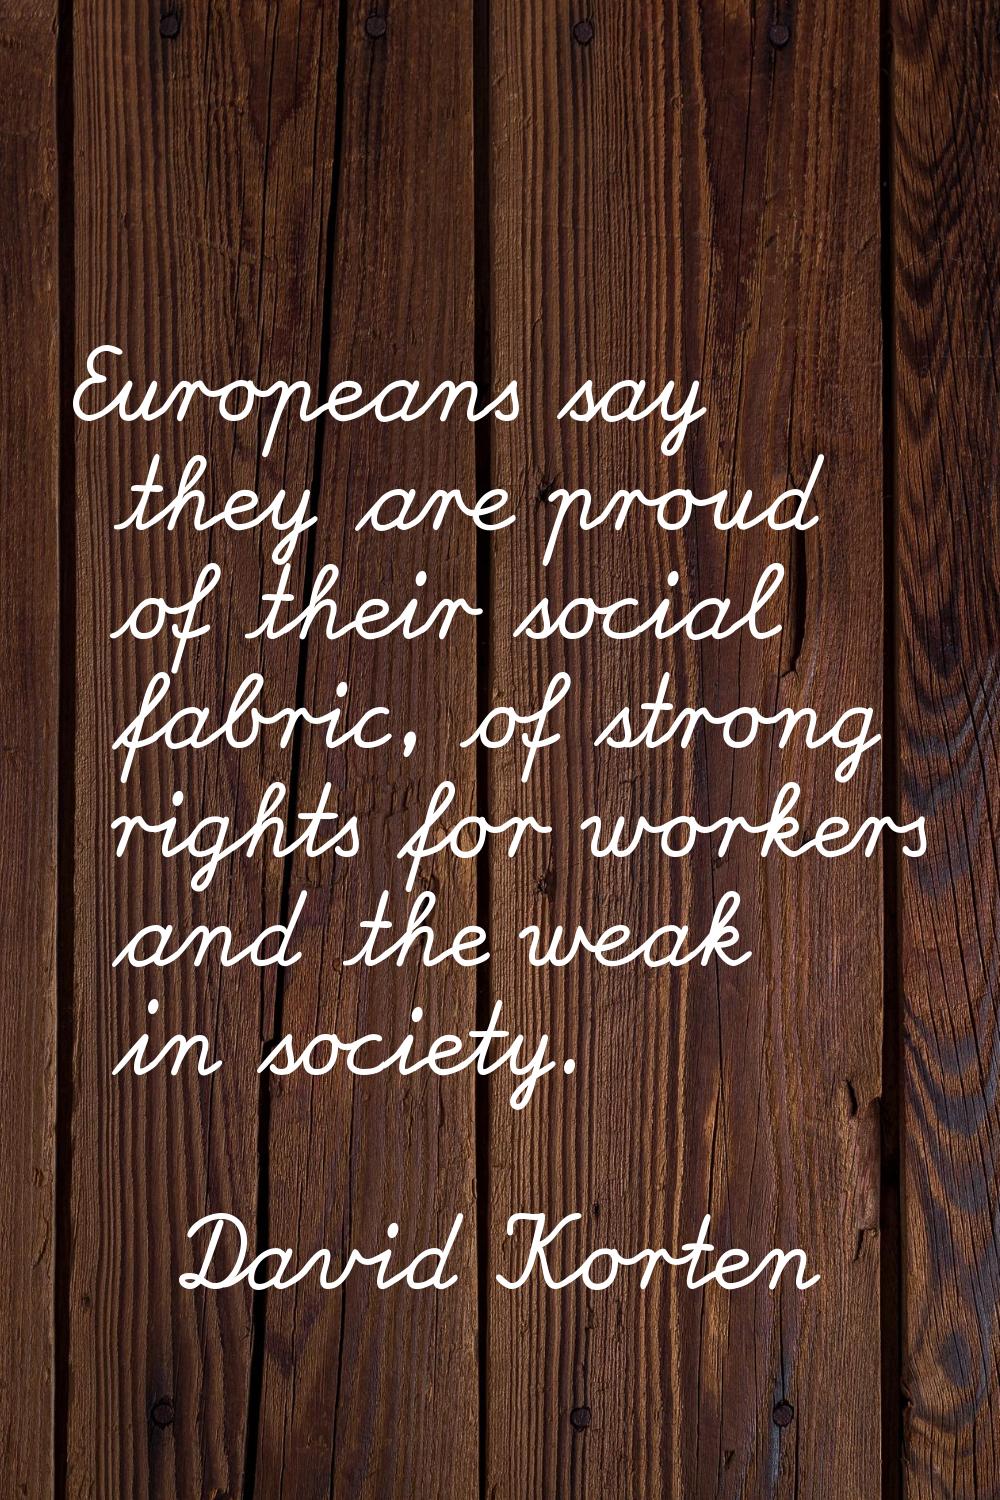 Europeans say they are proud of their social fabric, of strong rights for workers and the weak in s